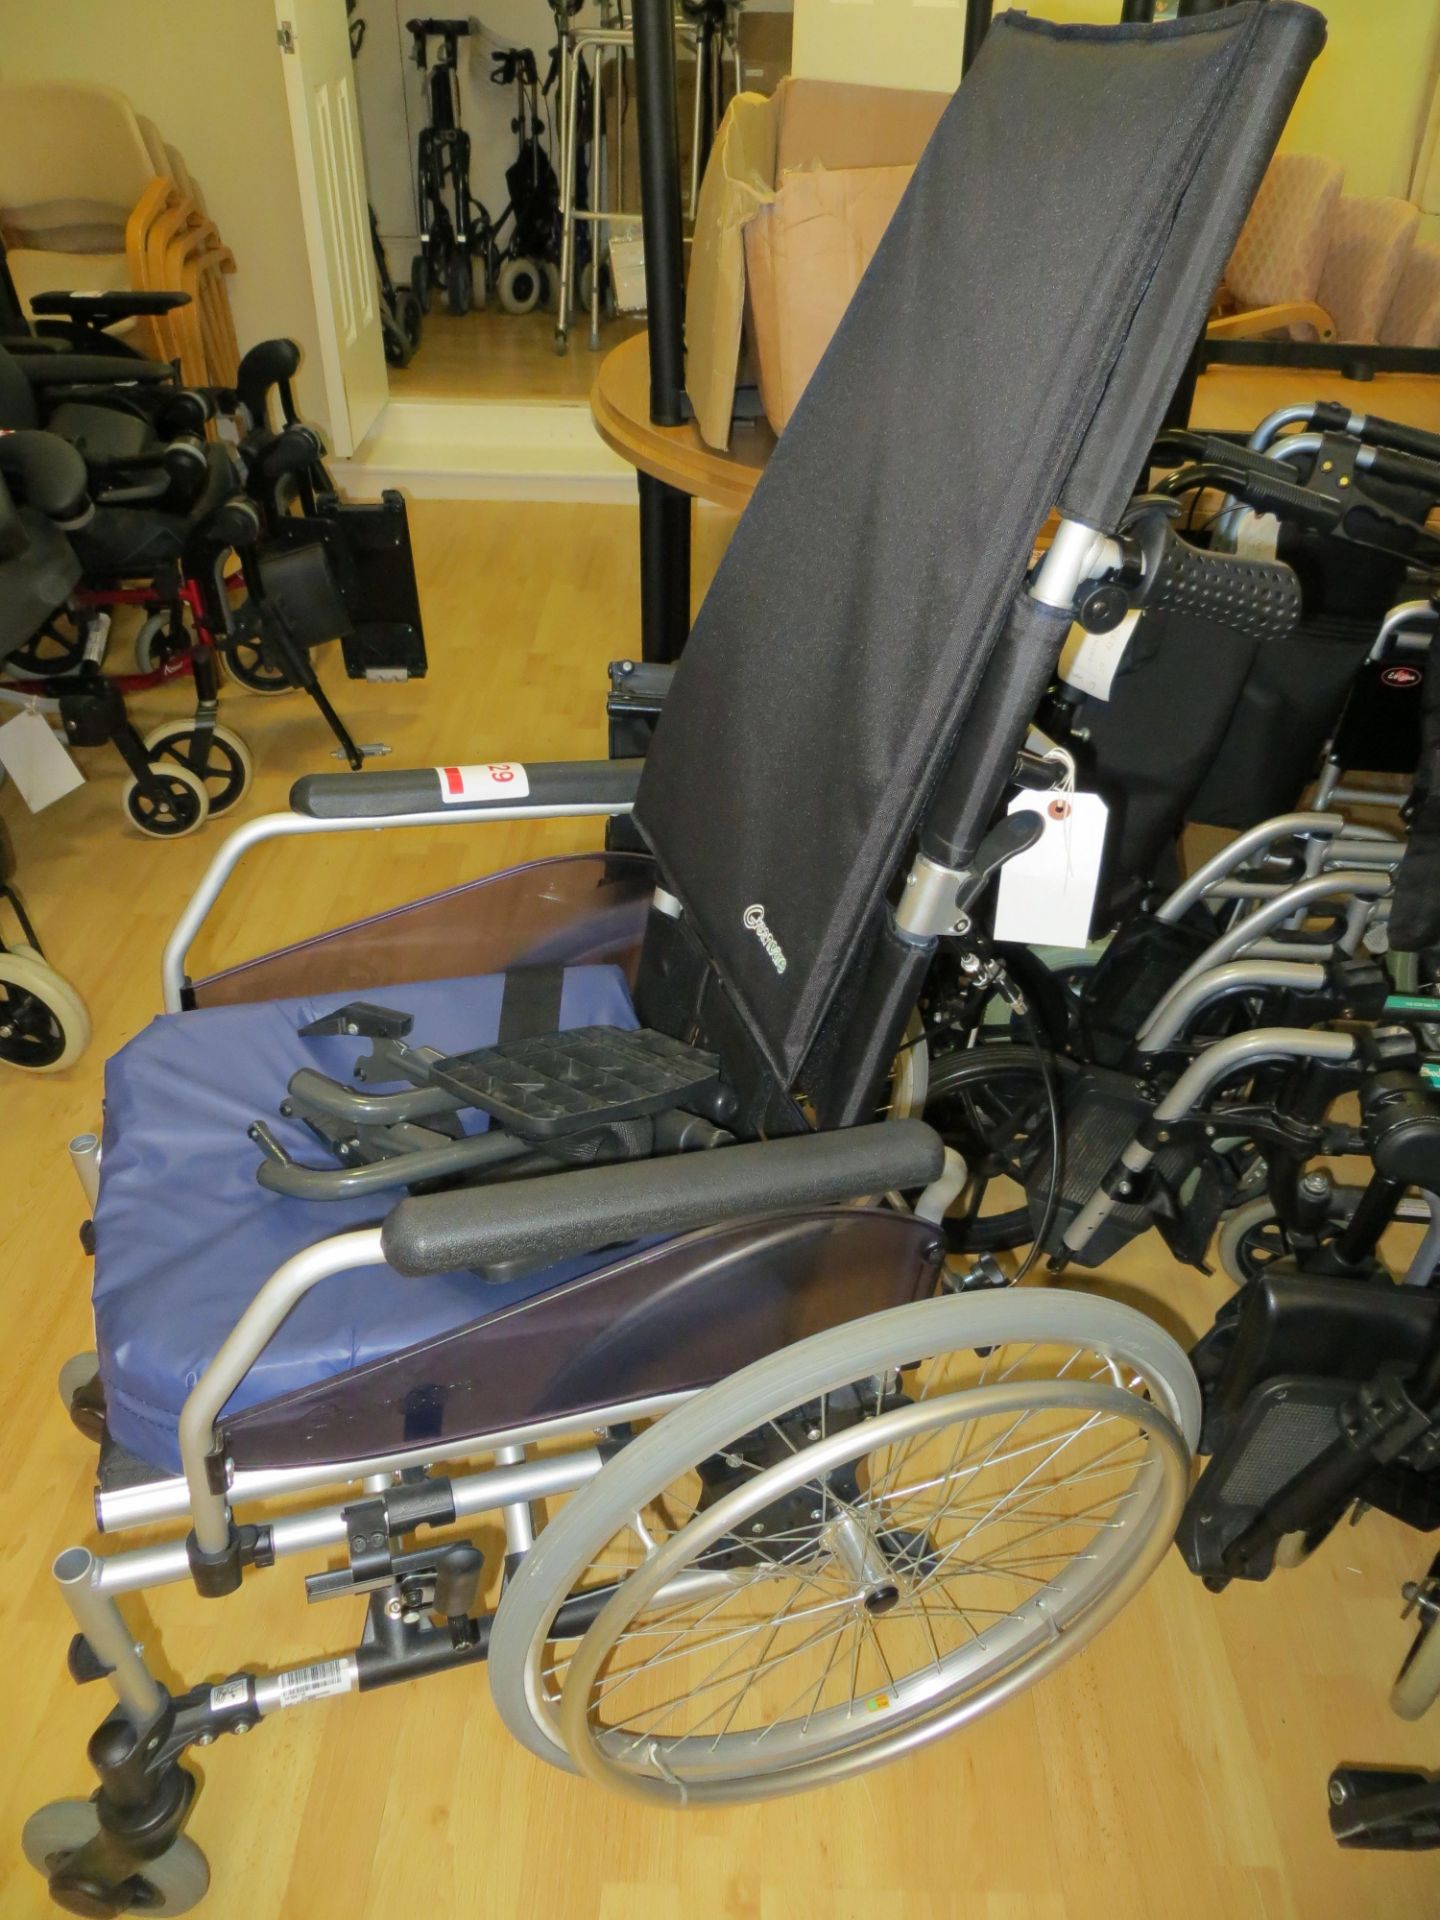 Greencare wheelchair s/n G52 0400182 - Image 2 of 2